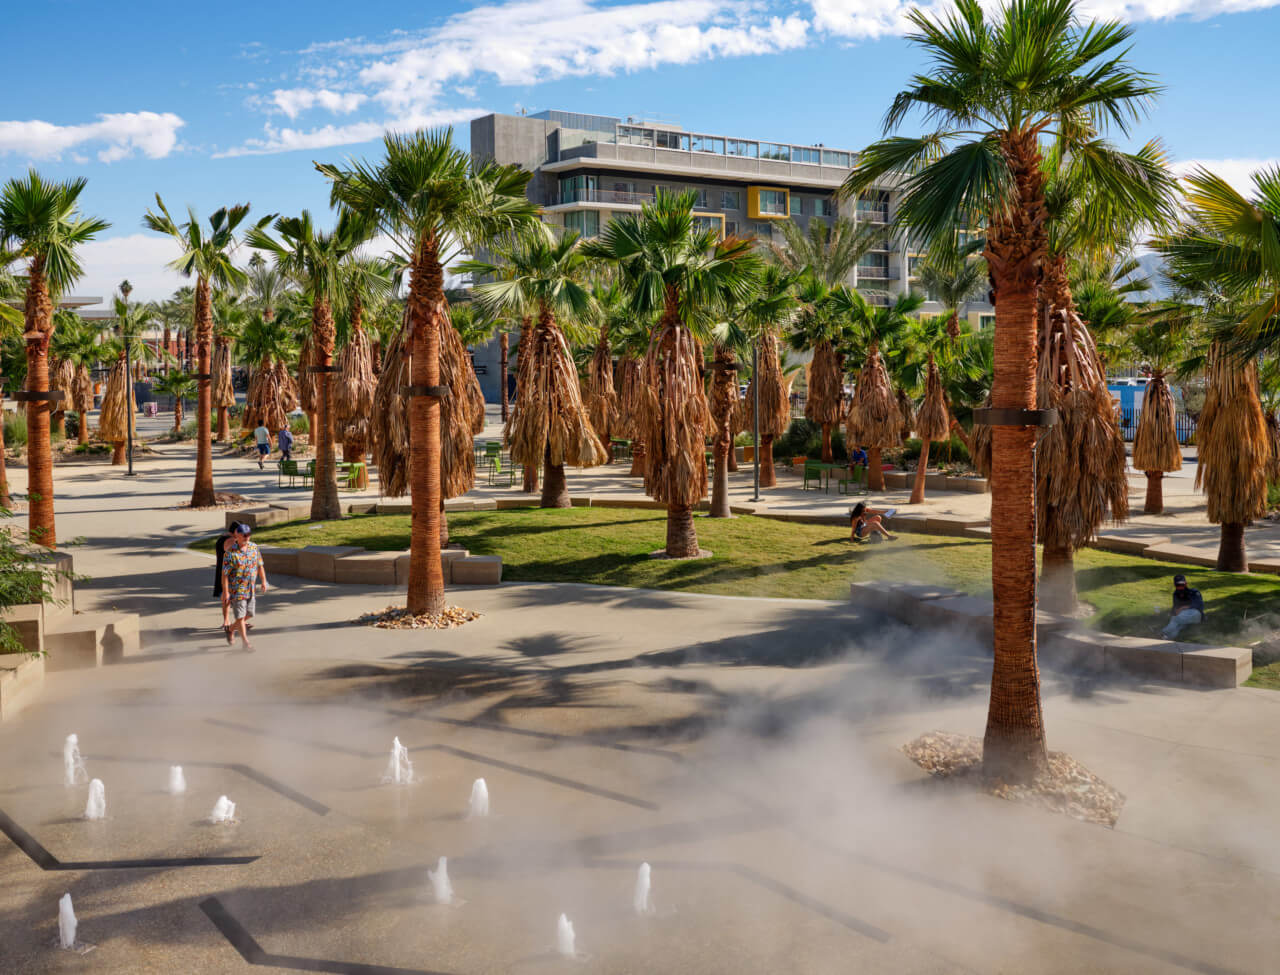 a misty water features in a palm tree-studded park space